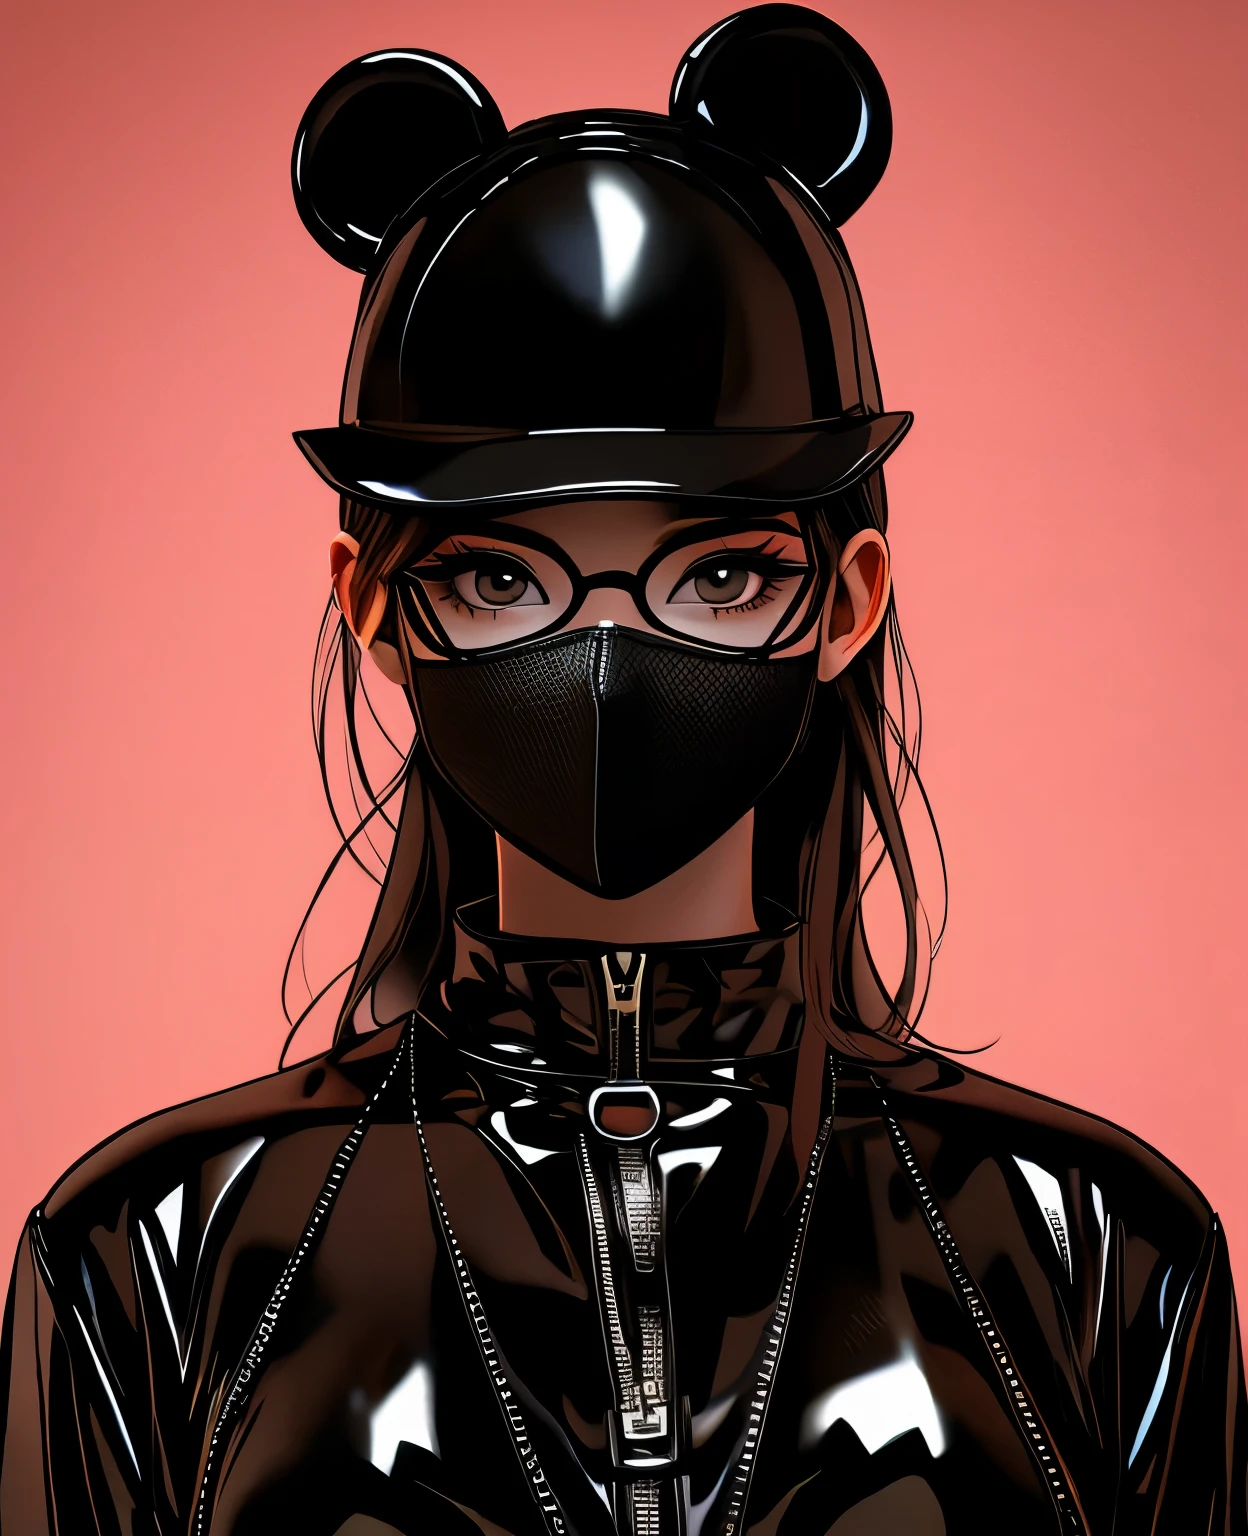 there is a woman wearing a black latex mask and a black rubber bear mask, black latex female balaclava, rubber and latex, rubber, rubber latex, inspired by Hedi Xandt, hard rubber chest, rubber suit, black latex sculpt, rubberhose style, latex domme, submissive, black rubber suit, latex, rubbery - looking body